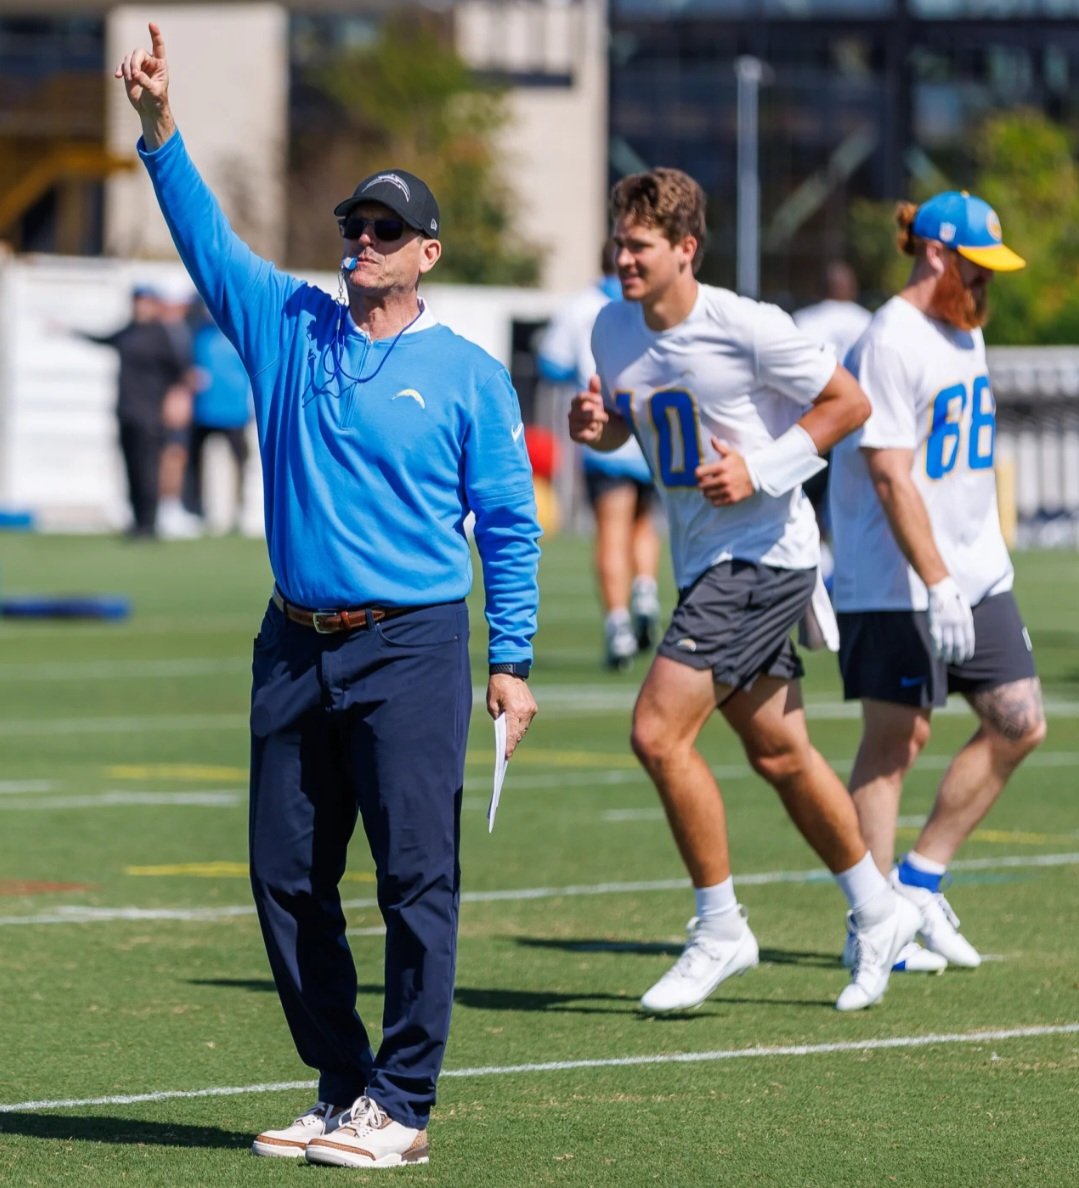 I still can't believe Jim Harbaugh is our coach. Regardless of what happens this season the energy, vibes, wisdom and just plain FUN this guy brings is everything. 💙🤩💙⚡️